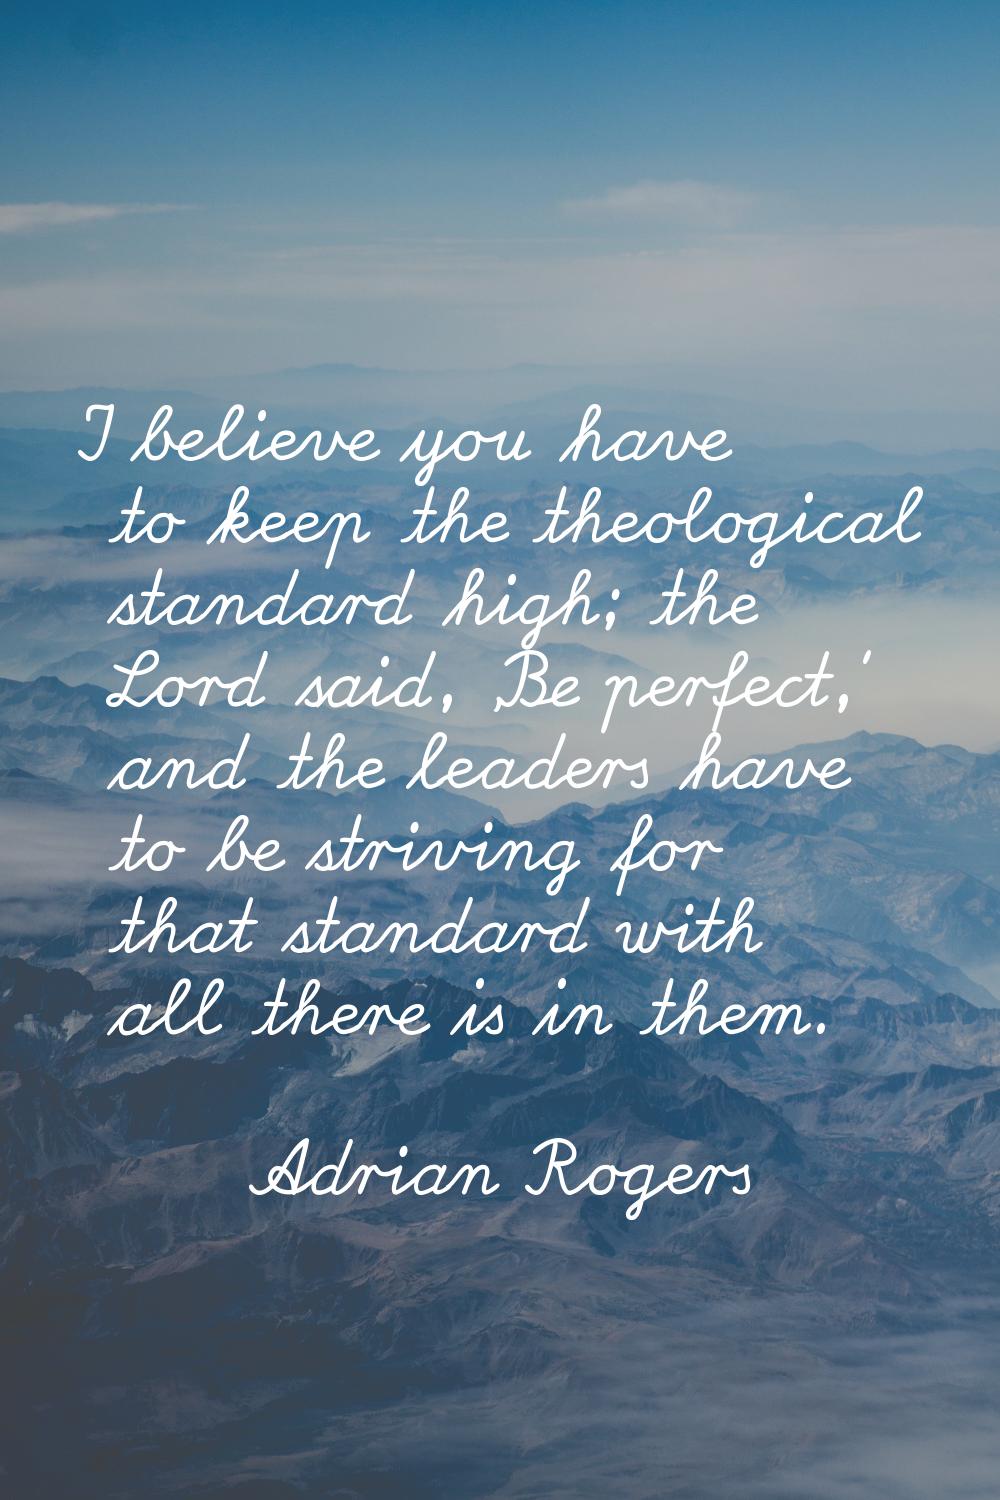 I believe you have to keep the theological standard high; the Lord said, 'Be perfect,' and the lead